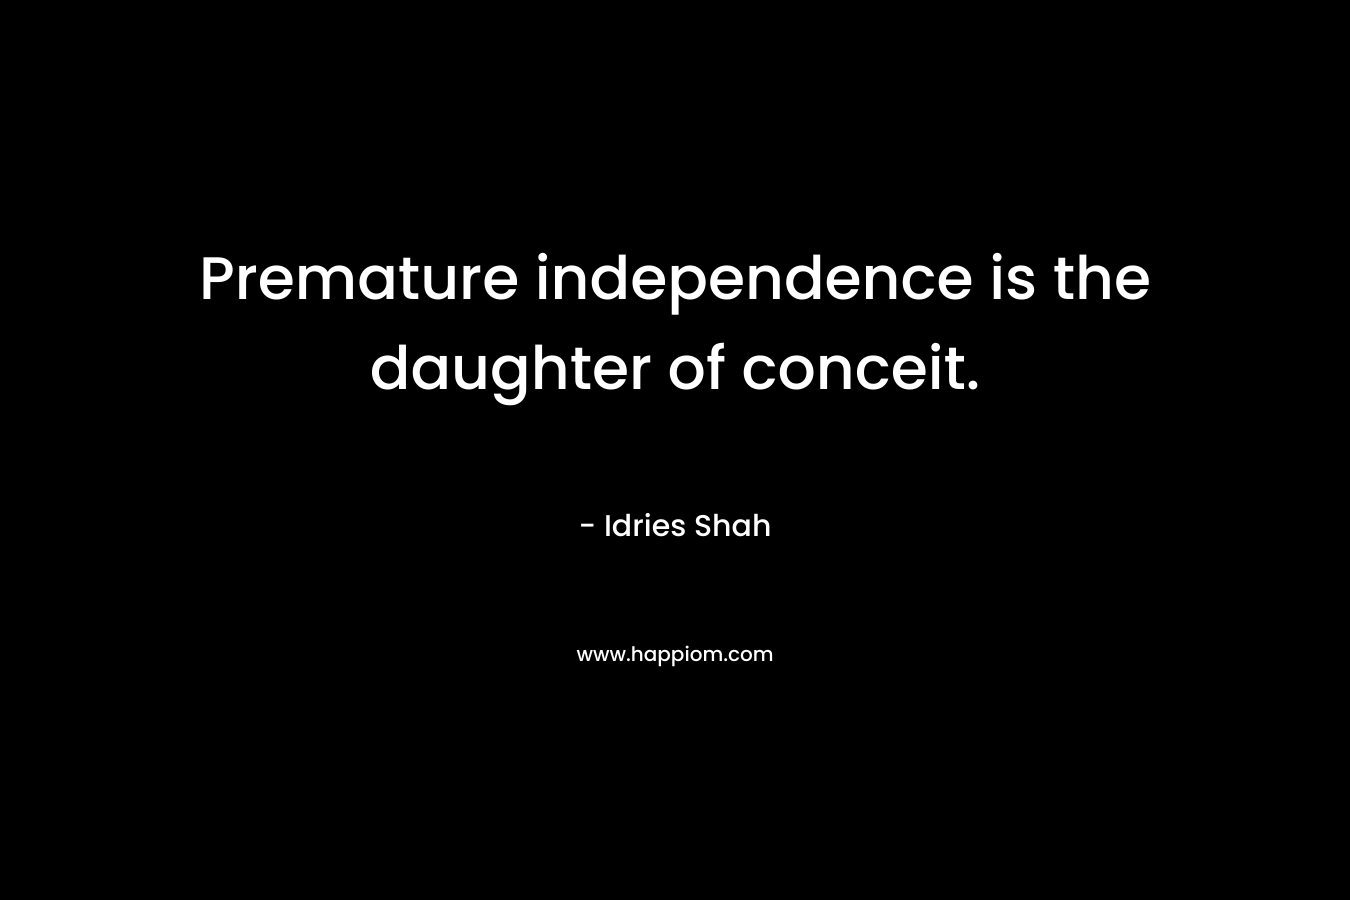 Premature independence is the daughter of conceit.